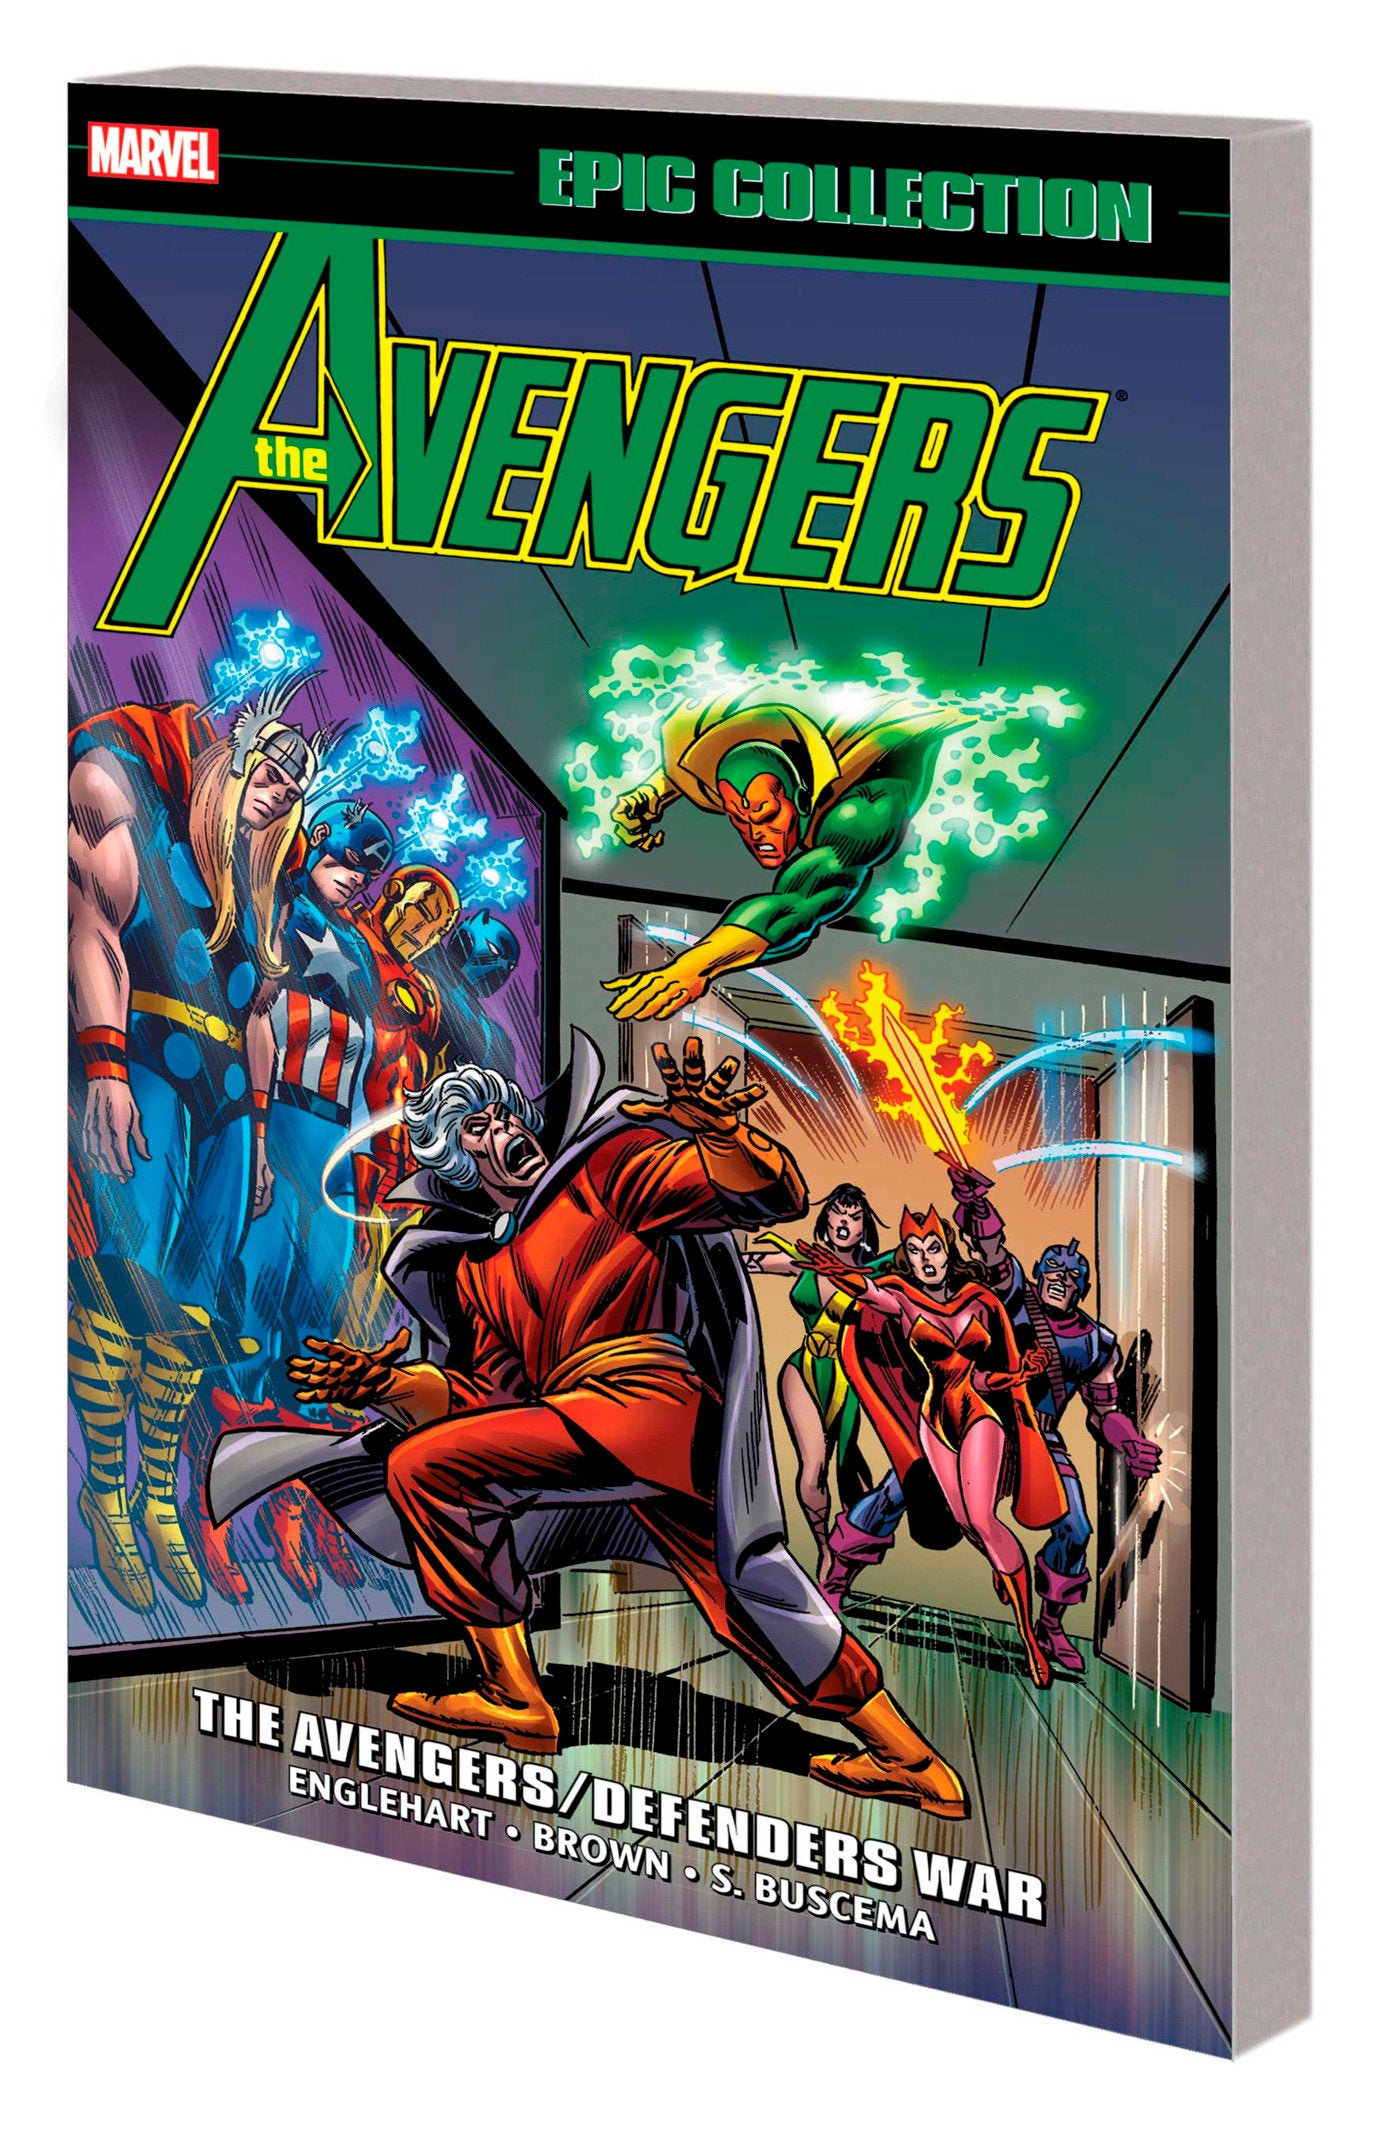 AVENGERS EPIC COLLECTION: THE AVENGERS/DEFENDERS WAR TRADE PAPERBACK